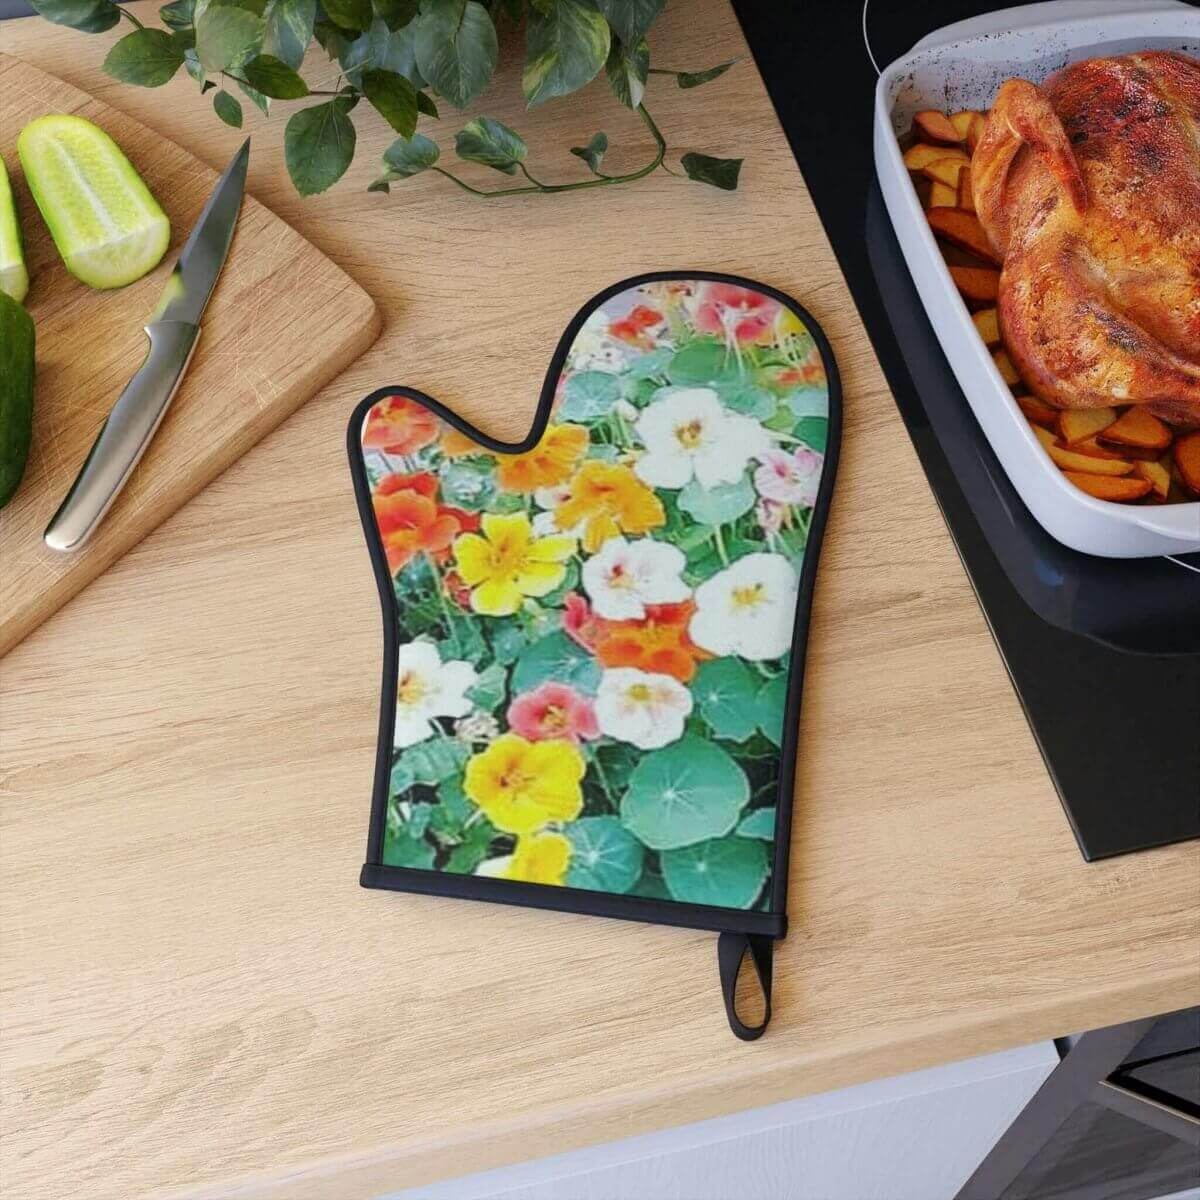 Oven Glove from Nasturtium Garden Collection - Enhance your Cooking Experience - Hearth Home & Living